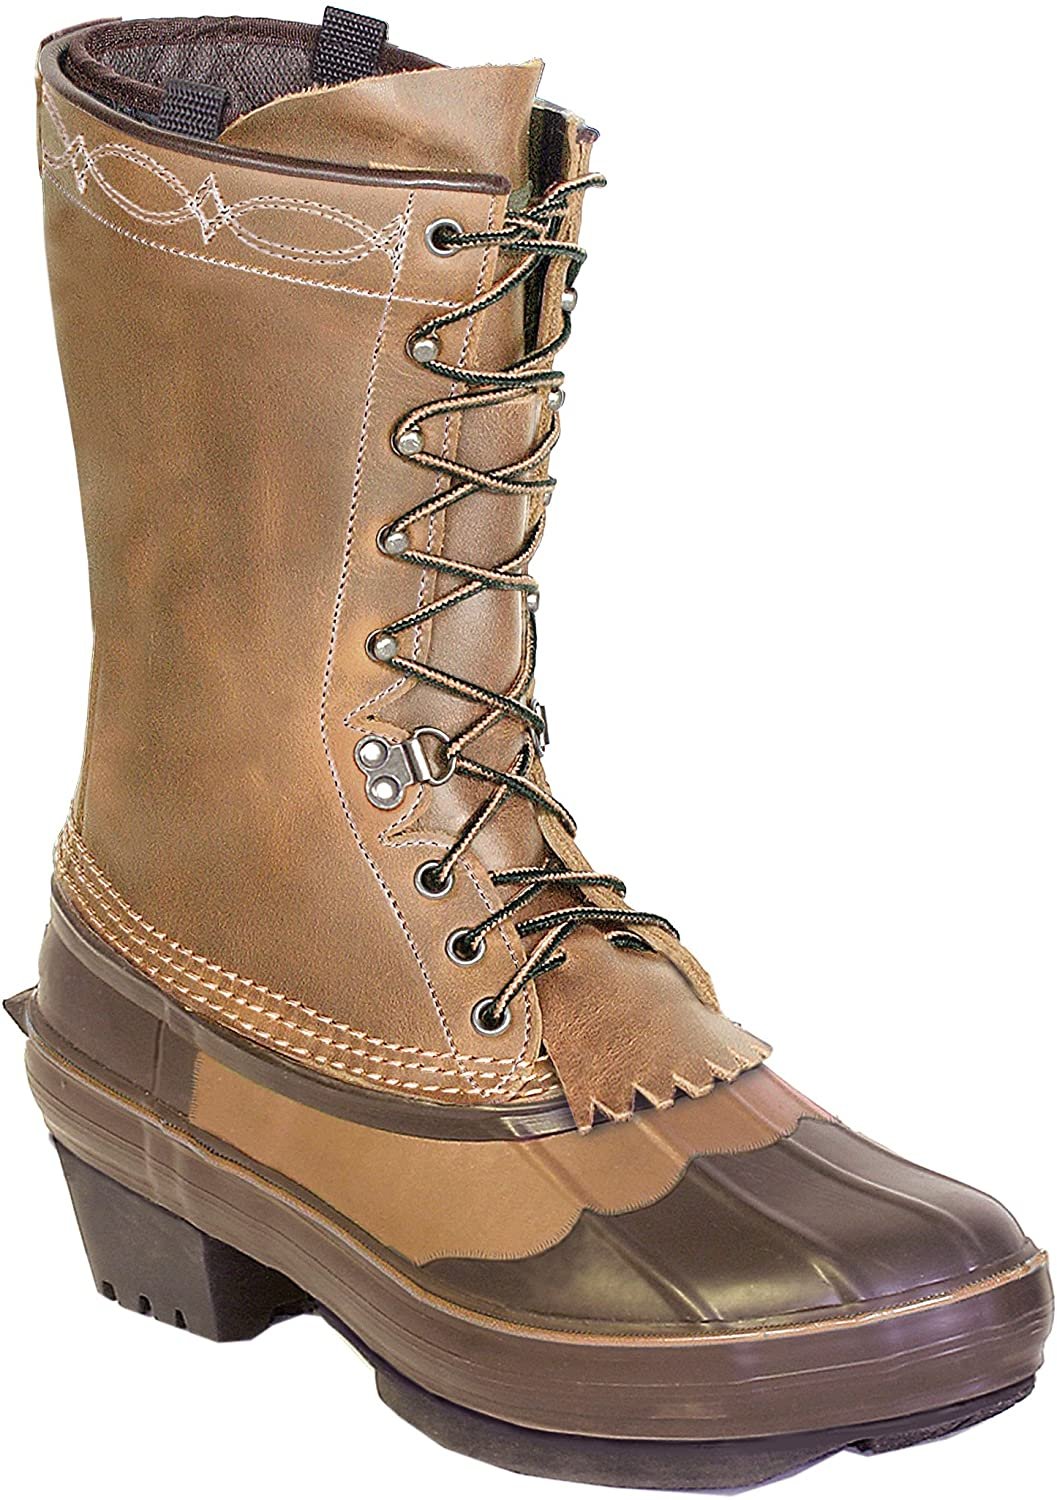 Pre-owned Kenetrek 11" Cowgirl Insulated Pac Boot In Brown